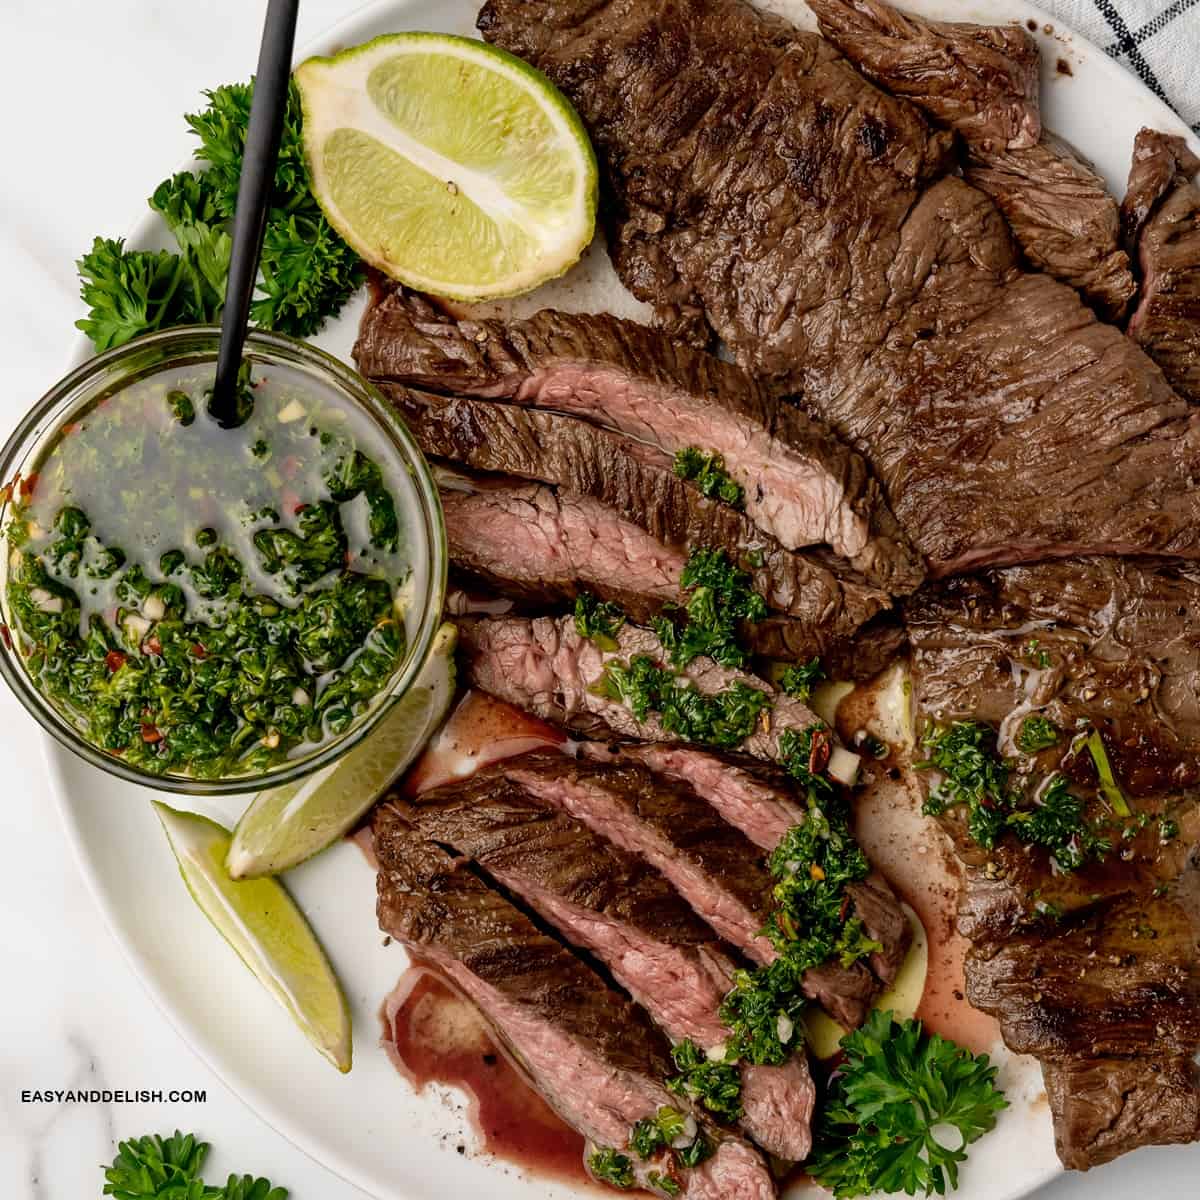 Introduction to Skirt Steak Mastery